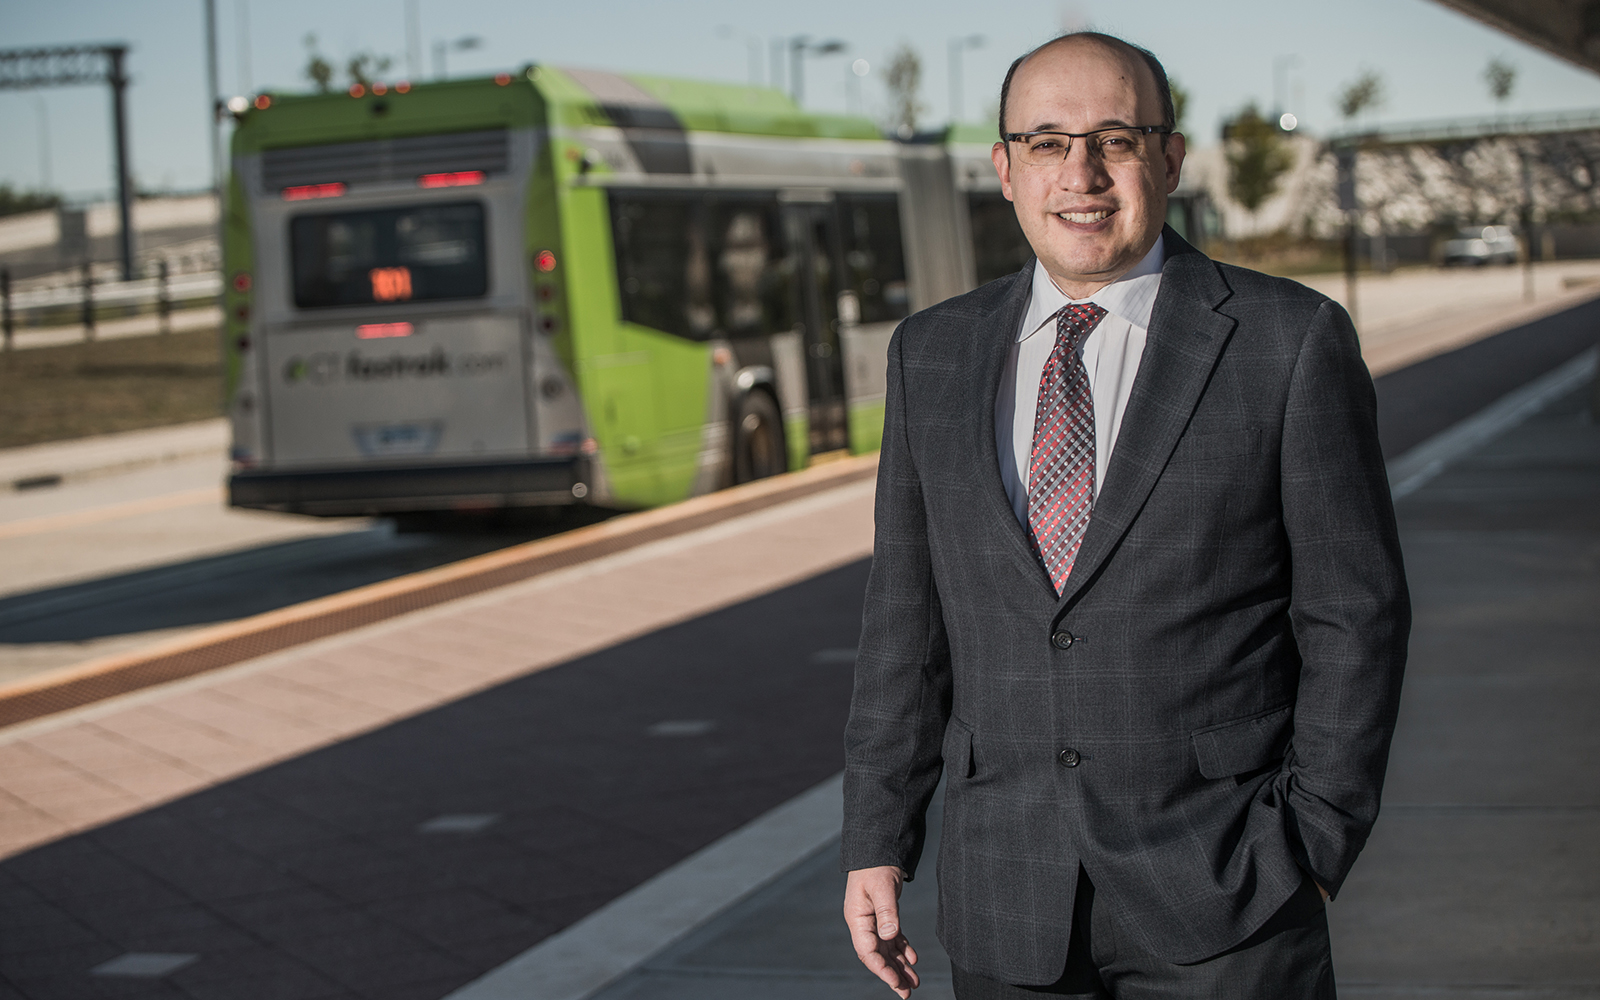 Business professor Jeff Cohen, who has researched the business and real estate impacts of the CTfastrak bus rapid transit service, says the new Hartford Line commuter train will have an impact on land value and job opportunities in cities. (Nathan Oldham/UConn School of Business)